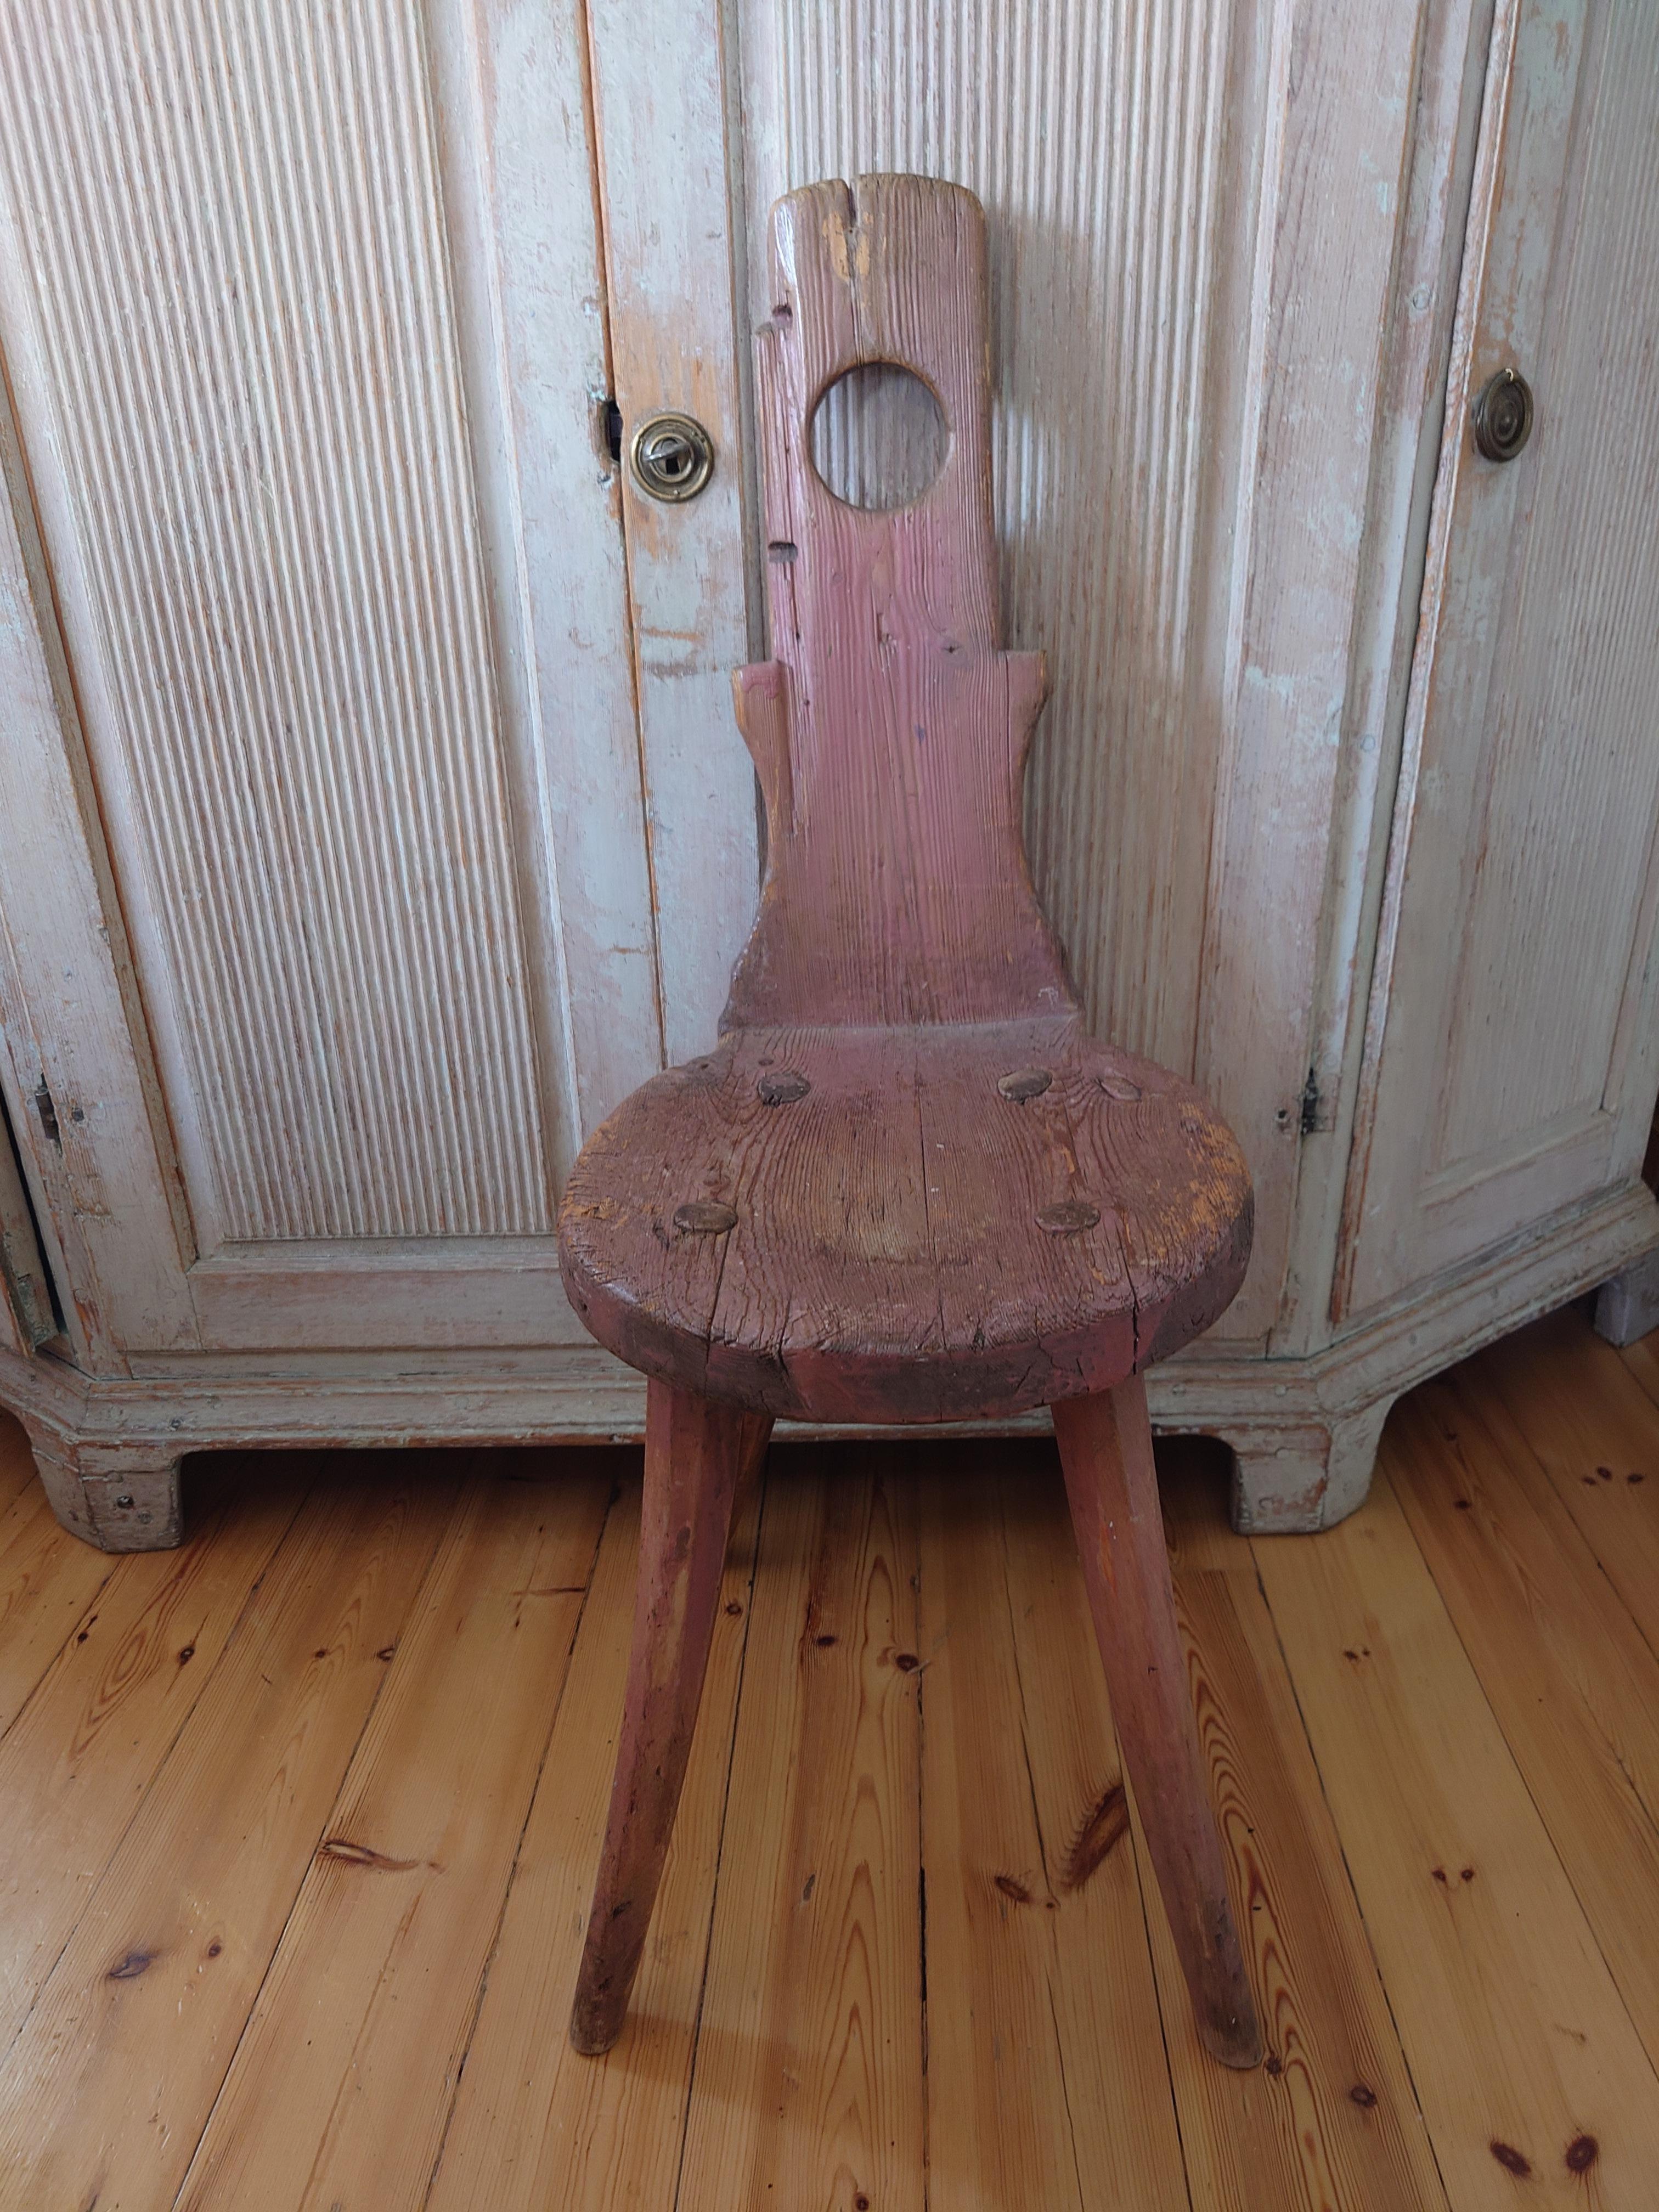 18th Century Swedish Primitive Folk Art Chair from Northern Sweden.
This charming chair is a true piece of history. It was made by hand in Northern Sweden around 1850.
The chair is charming primitive model made by hand in painted pine.
 It is